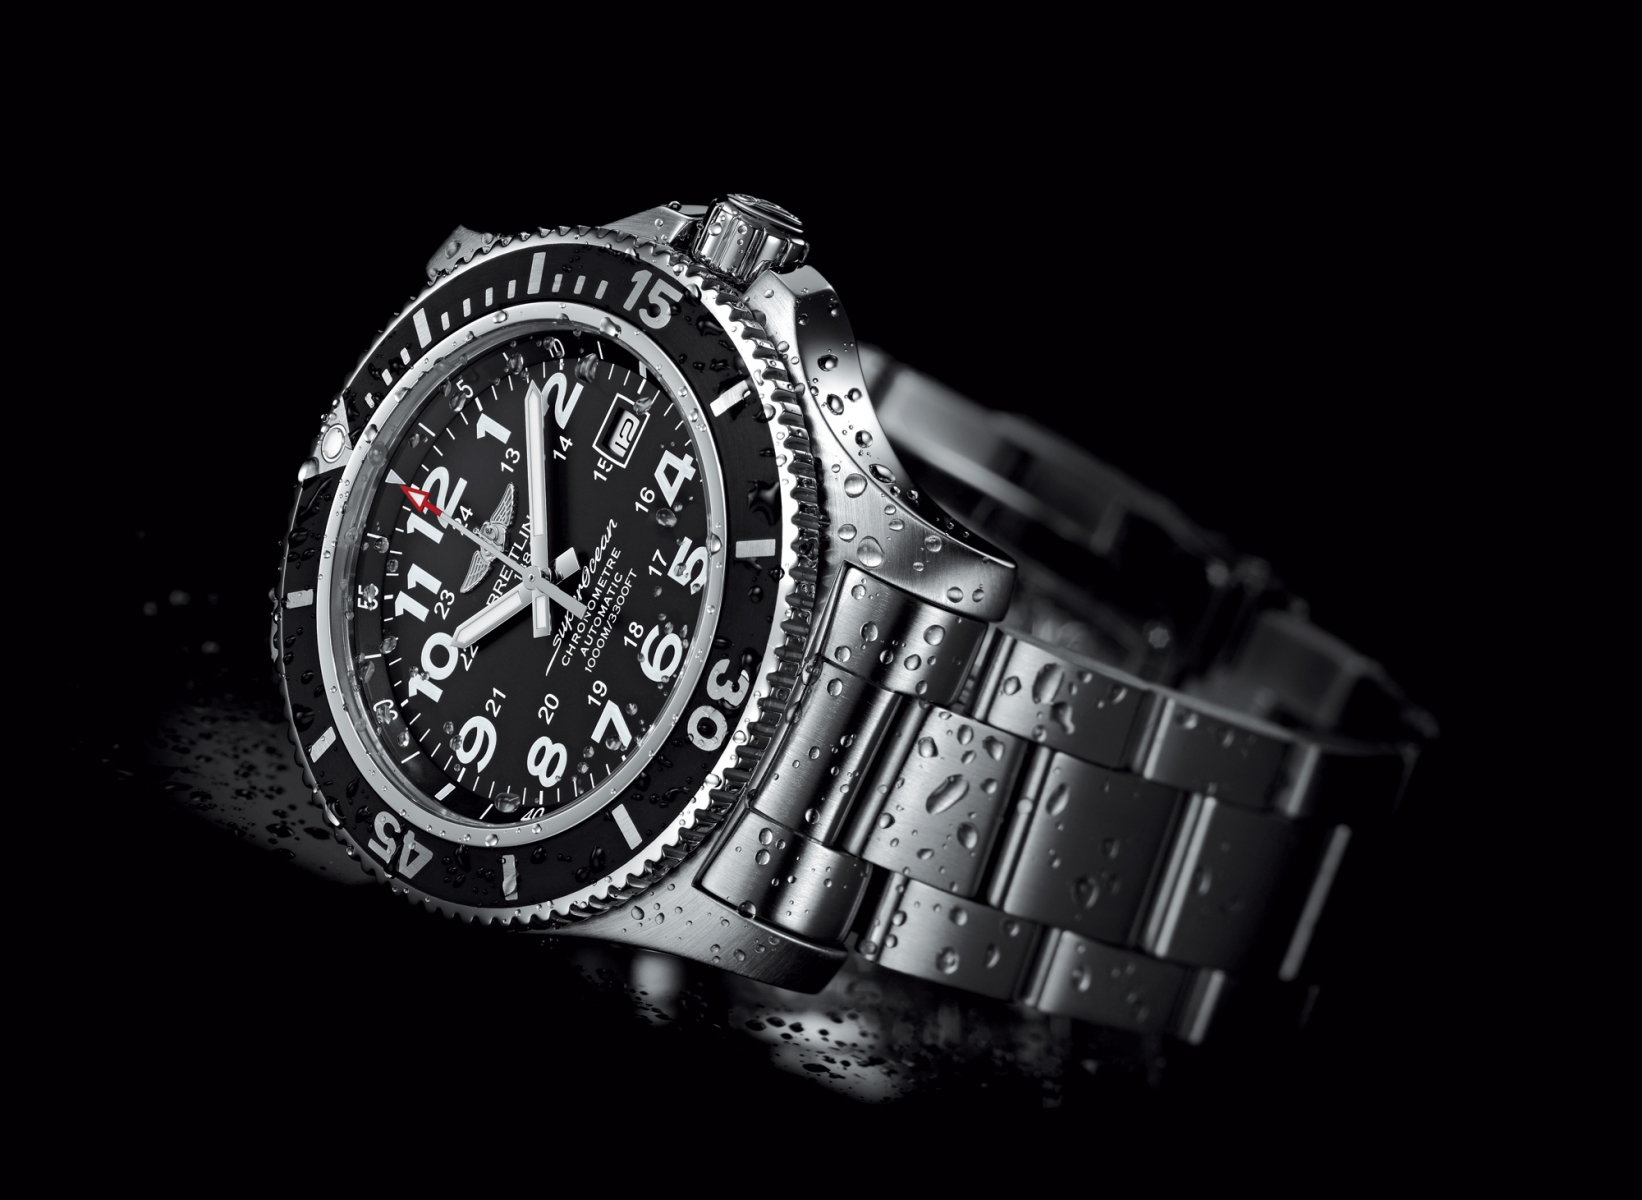 Breitling Avengers Seawolf Stainless Steel Men's Watch Sapphire Crystal Reference A73390breitling Avengers Seawolf Code Red and Black Steel Limited Watch M17330 box paper